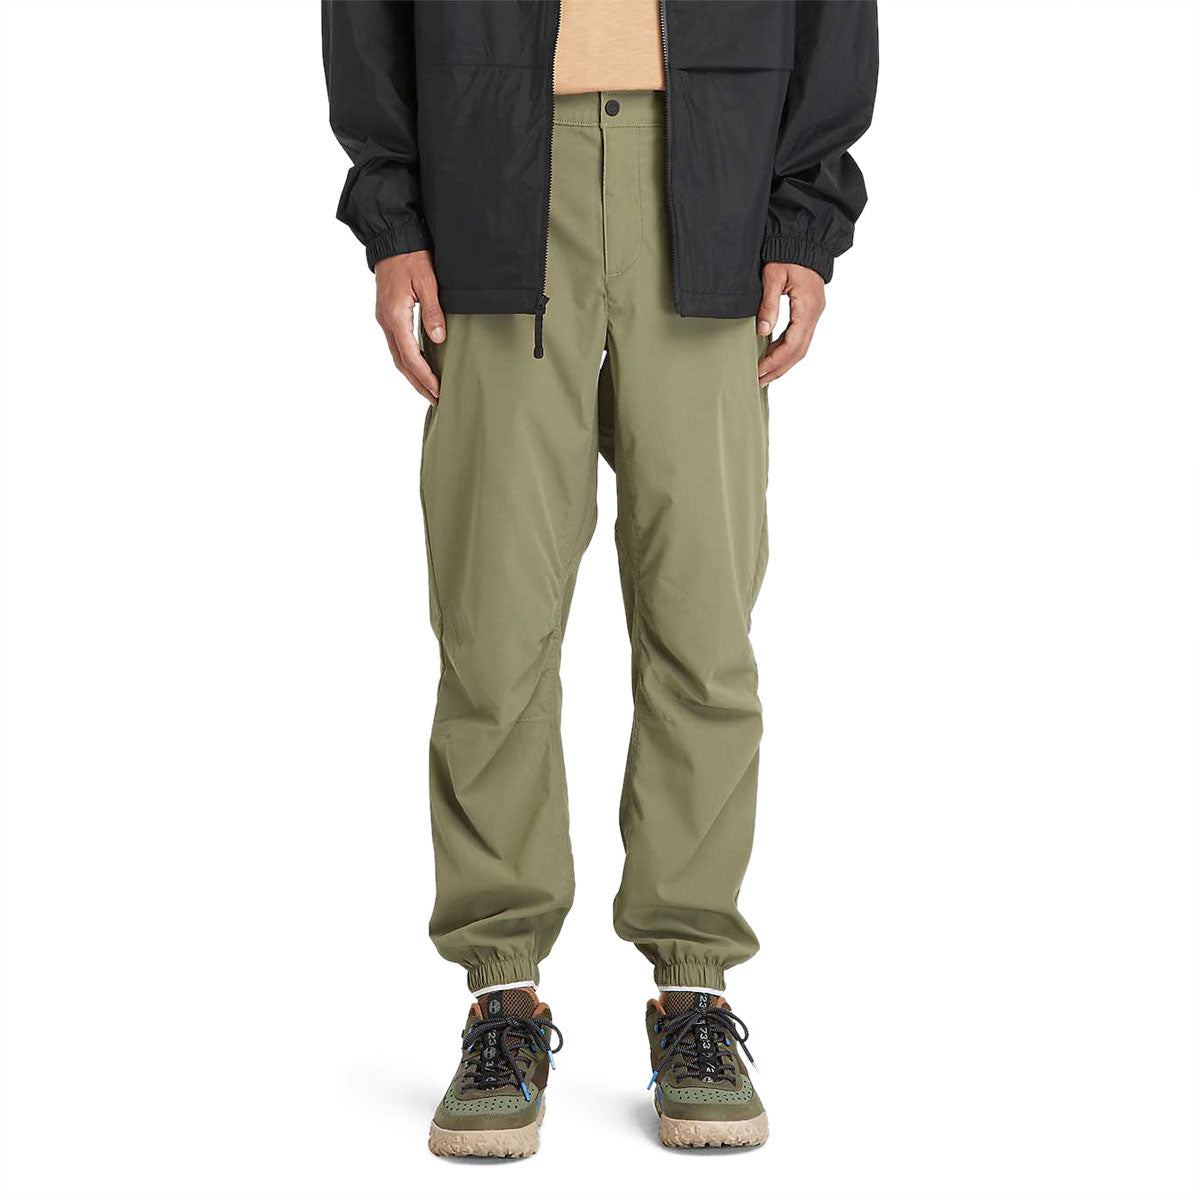 Timberland Dwr Jogger  Pants - Cassel Earth image 1